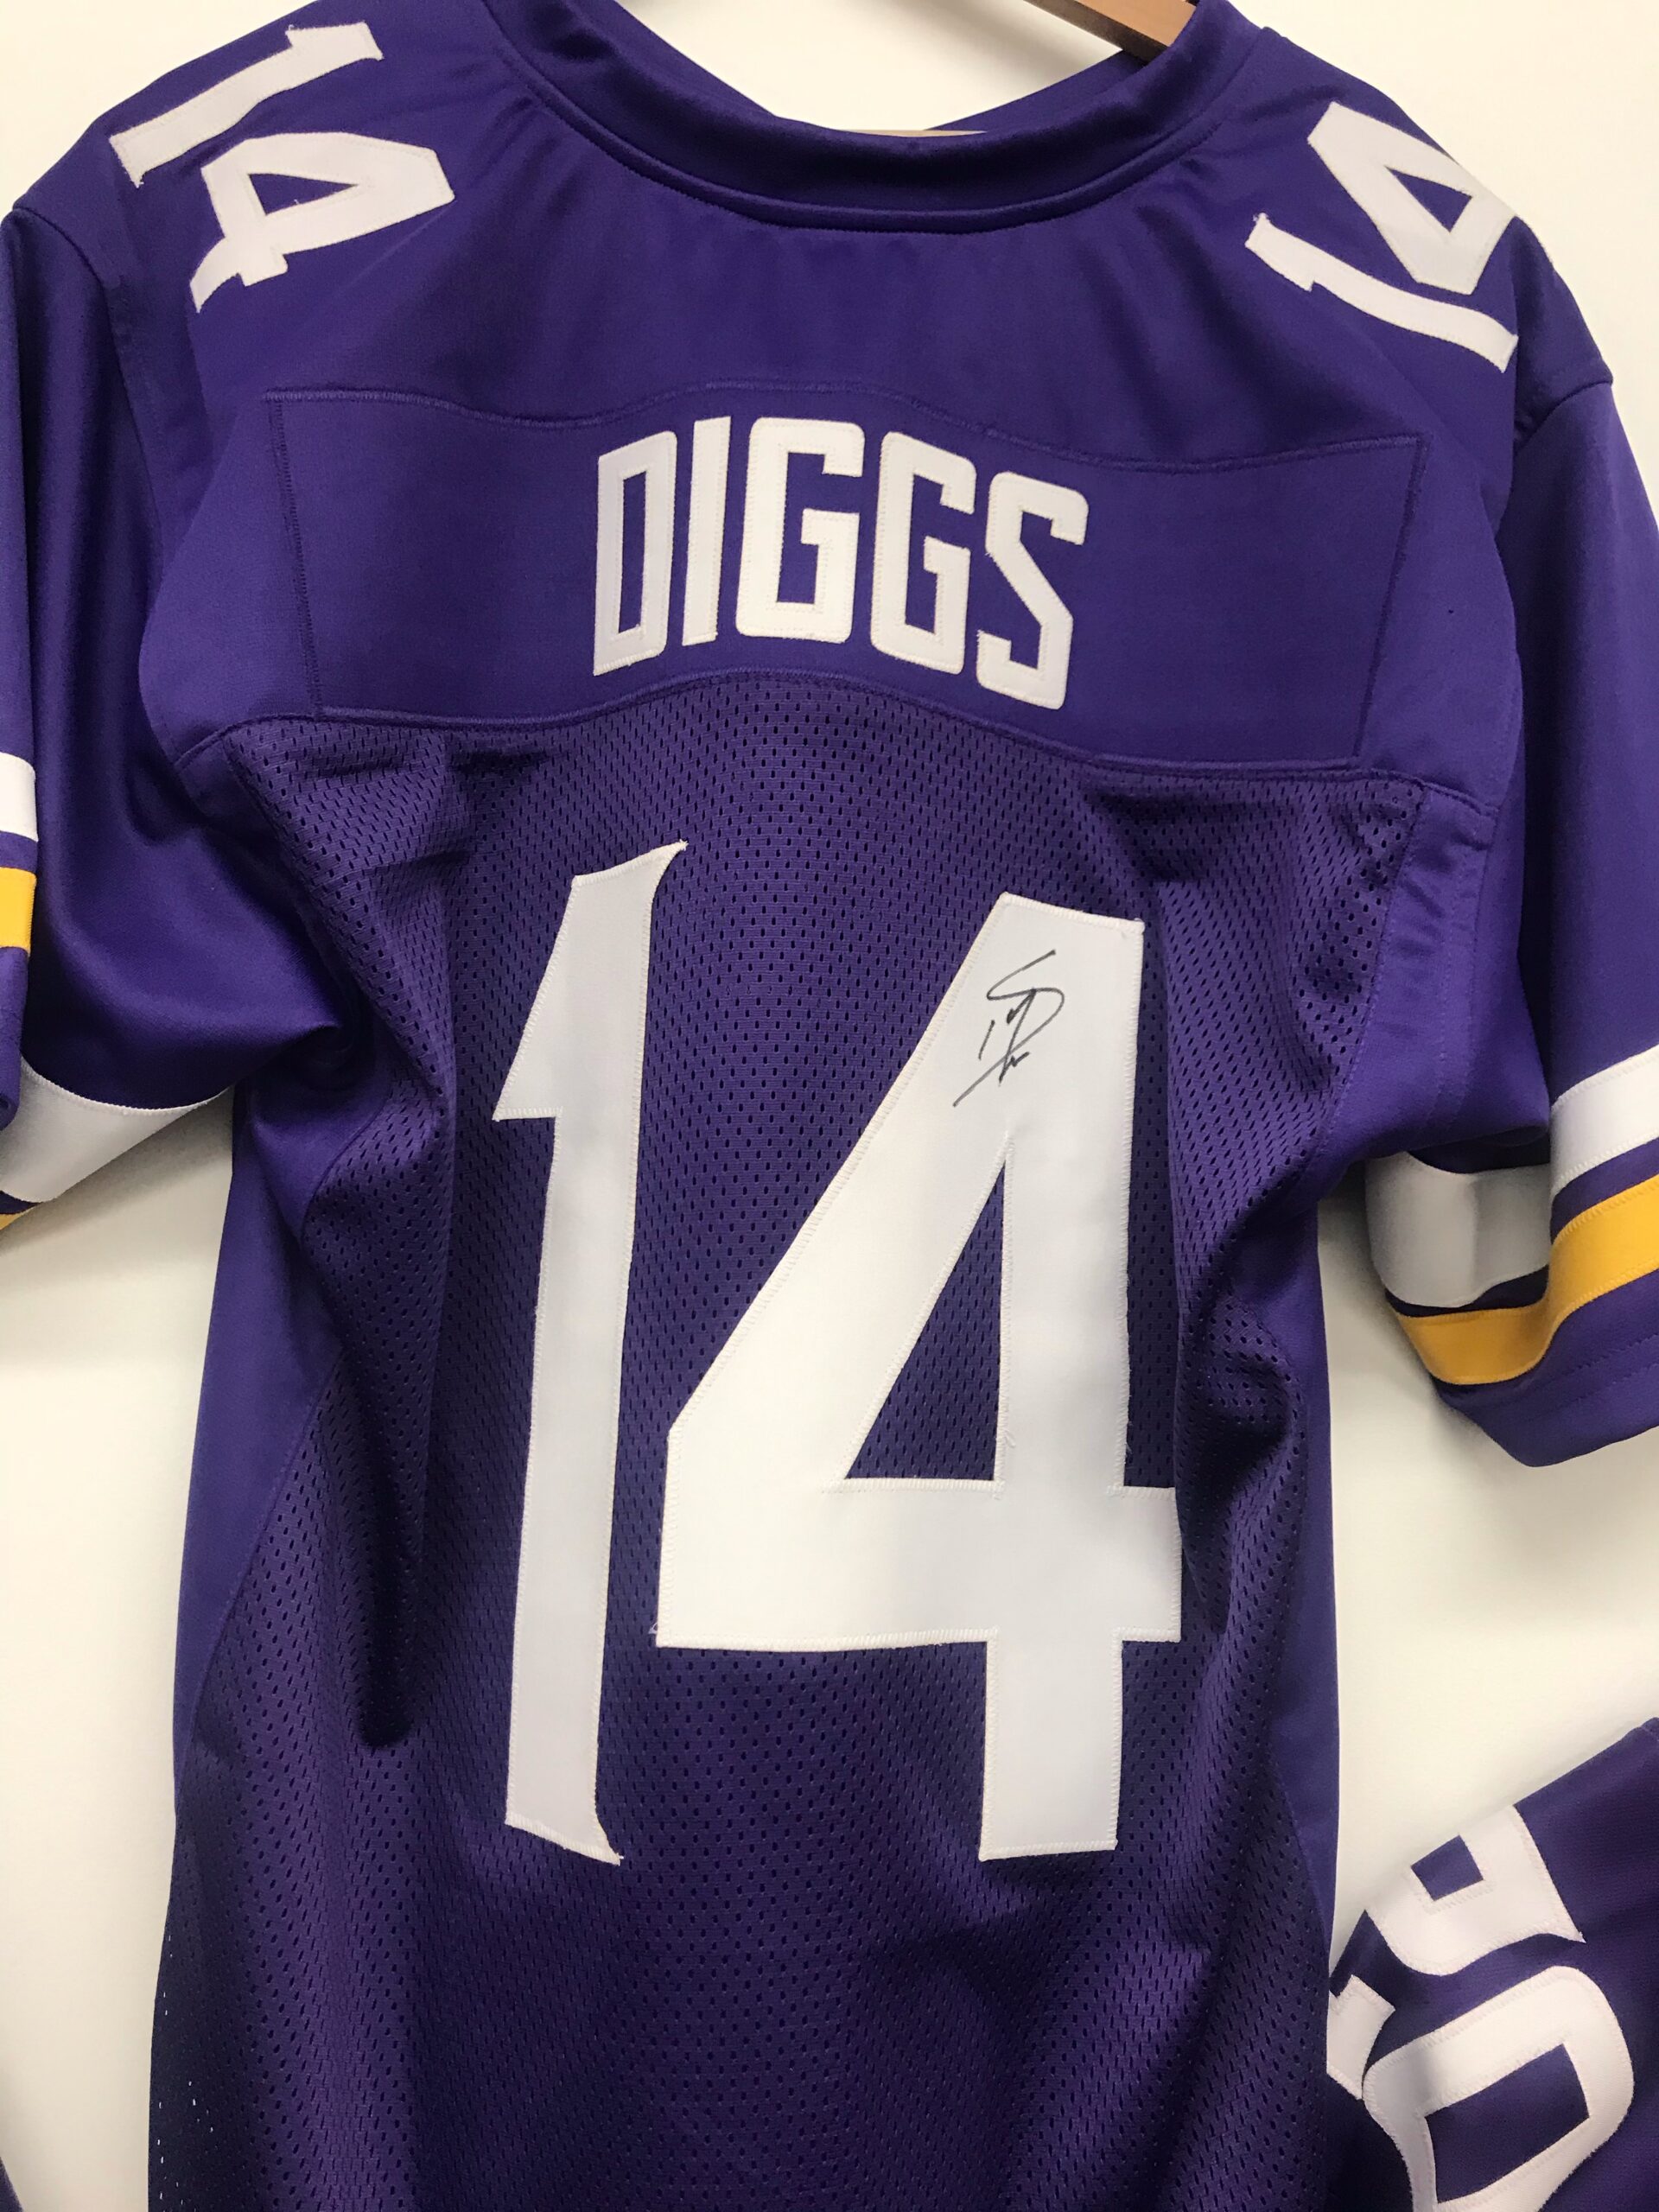 diggs signed jersey